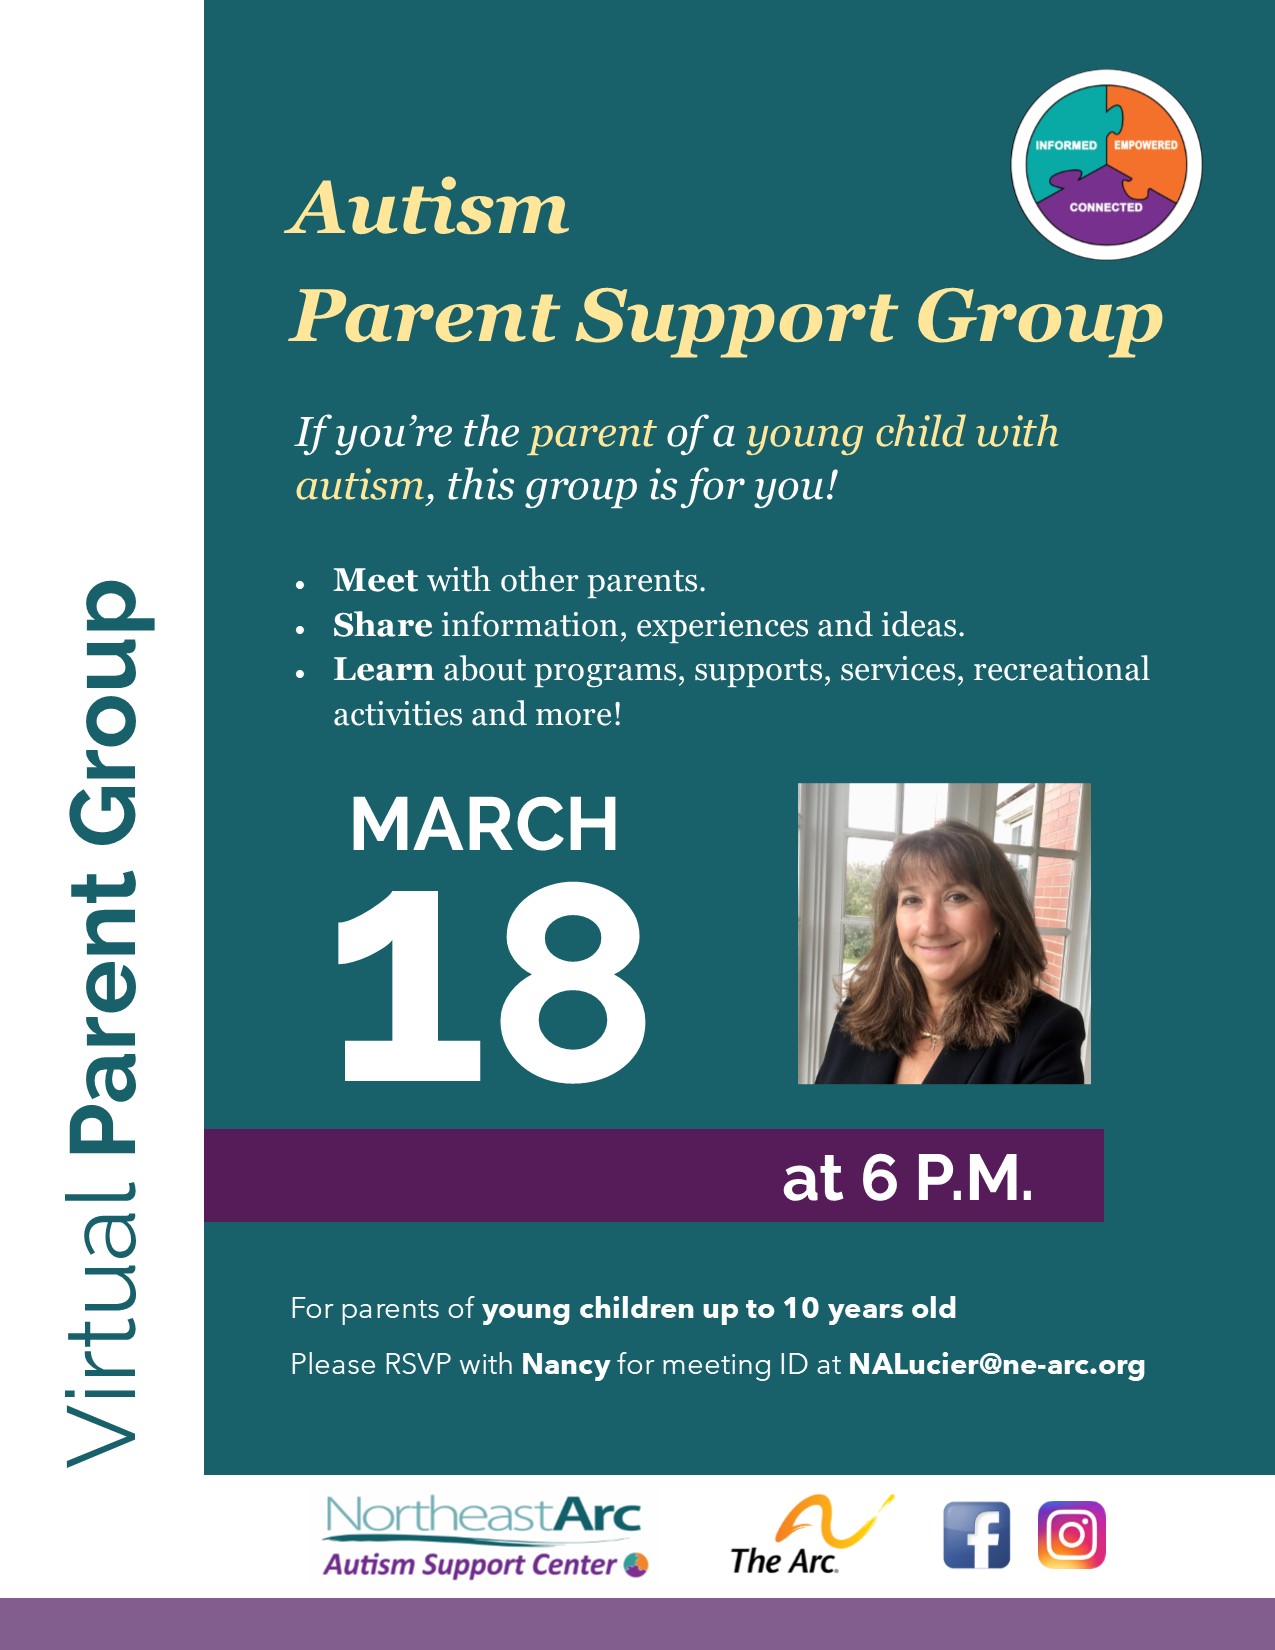 Support Group for Parents of Young Children with Autism. March 18 at 6PM. RSVP Nancy at NALucier@ne-arc.org for meeting ID to attend.